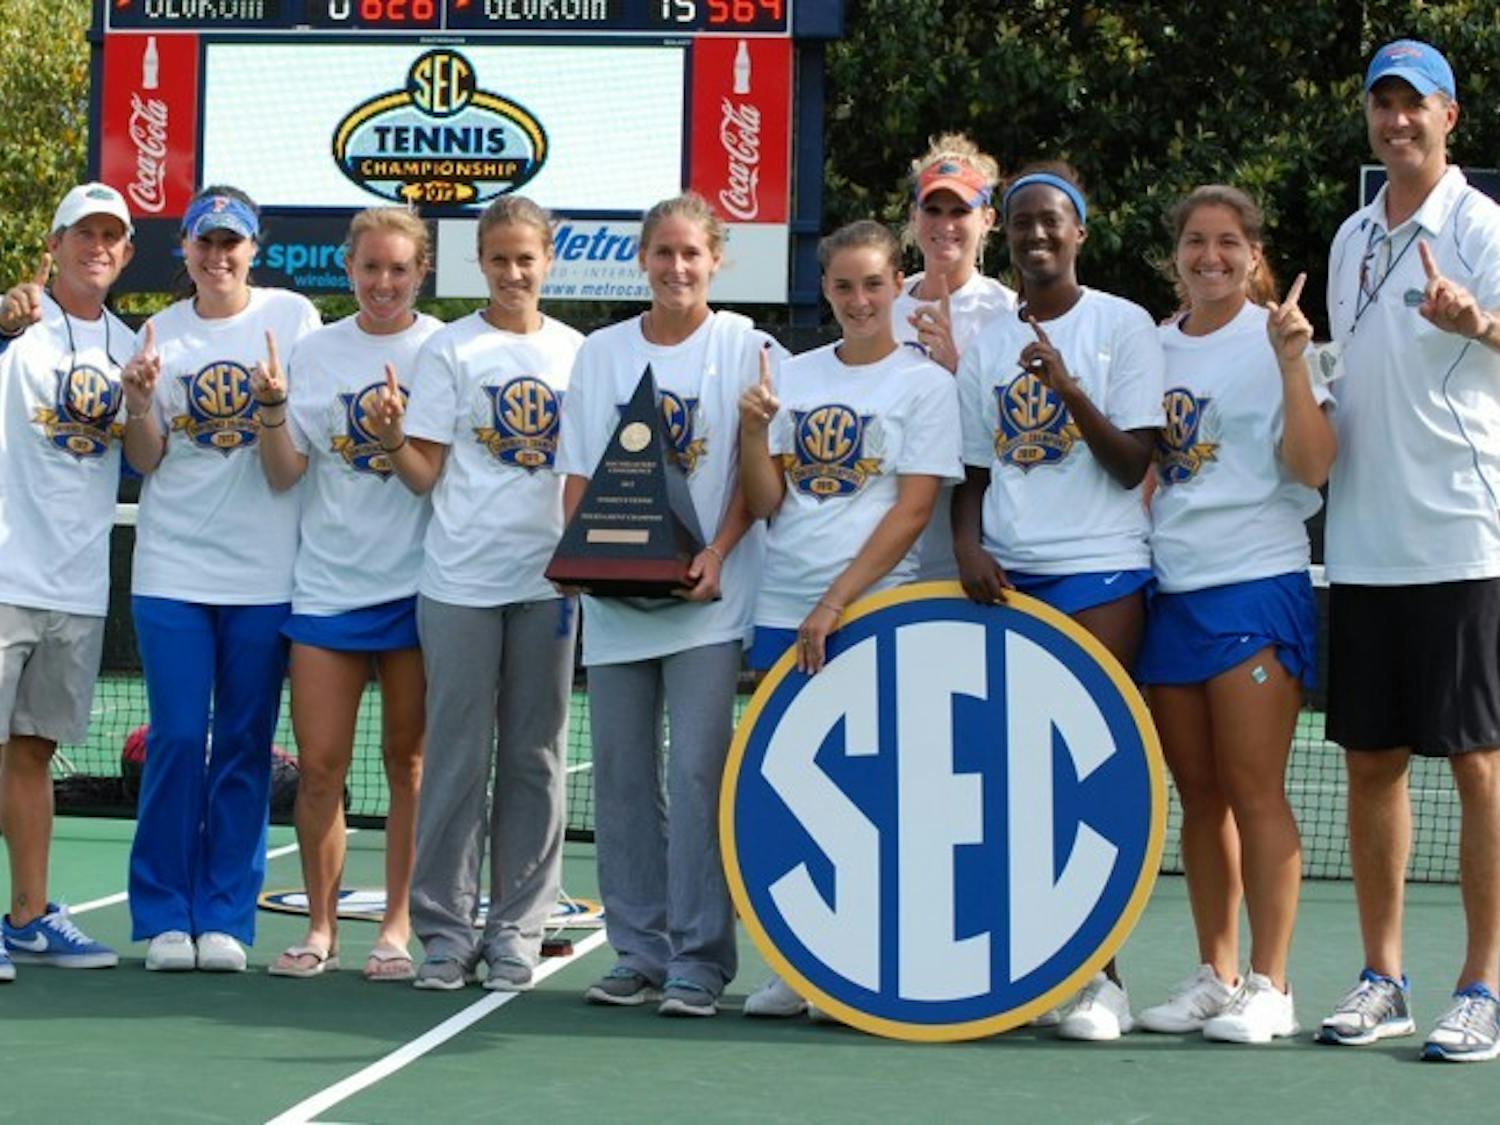 Florida’s women’s tennis team poses for a photo after winning its third straight Southeastern Conference Championship on Sunday by beating Georgia 4-1 in Oxford, Miss.